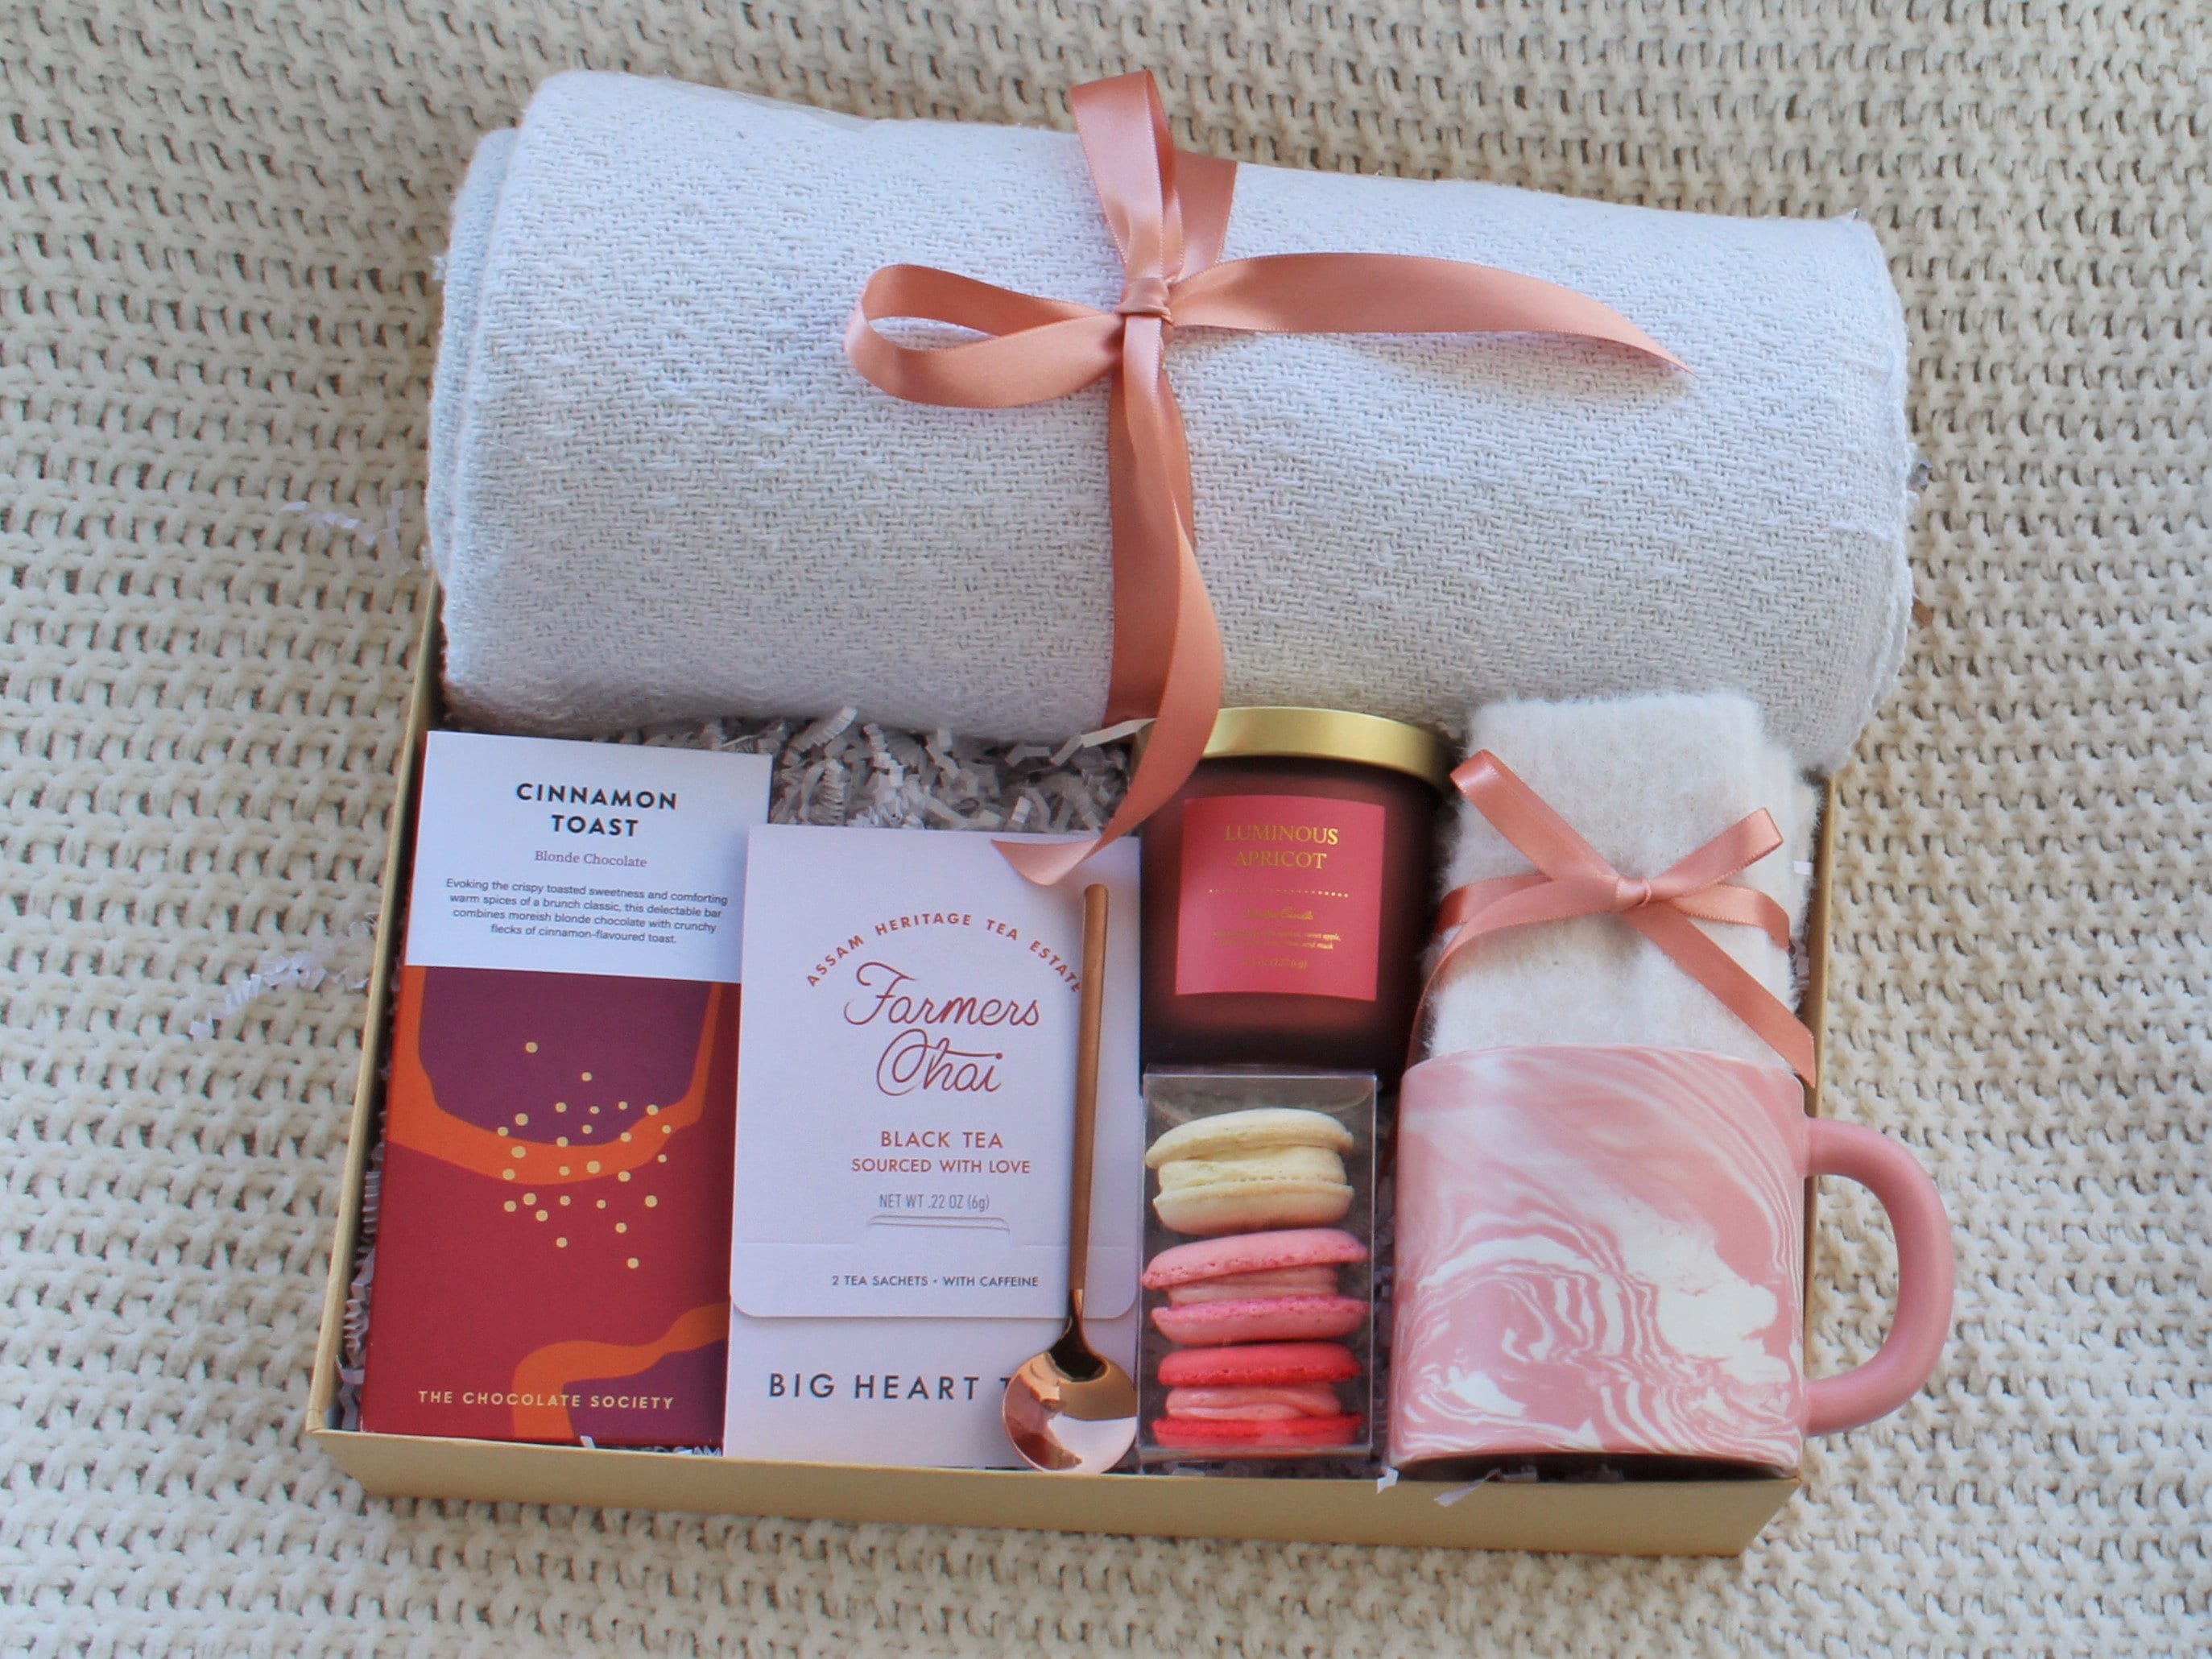 Buy Thinking of You Gift, Self Care Package for Her, Friendship, Get Well  Soon, Box of Hugs, Pregnancy, New Parents, Spa Set, Sympathy, Vegan Online  in India 